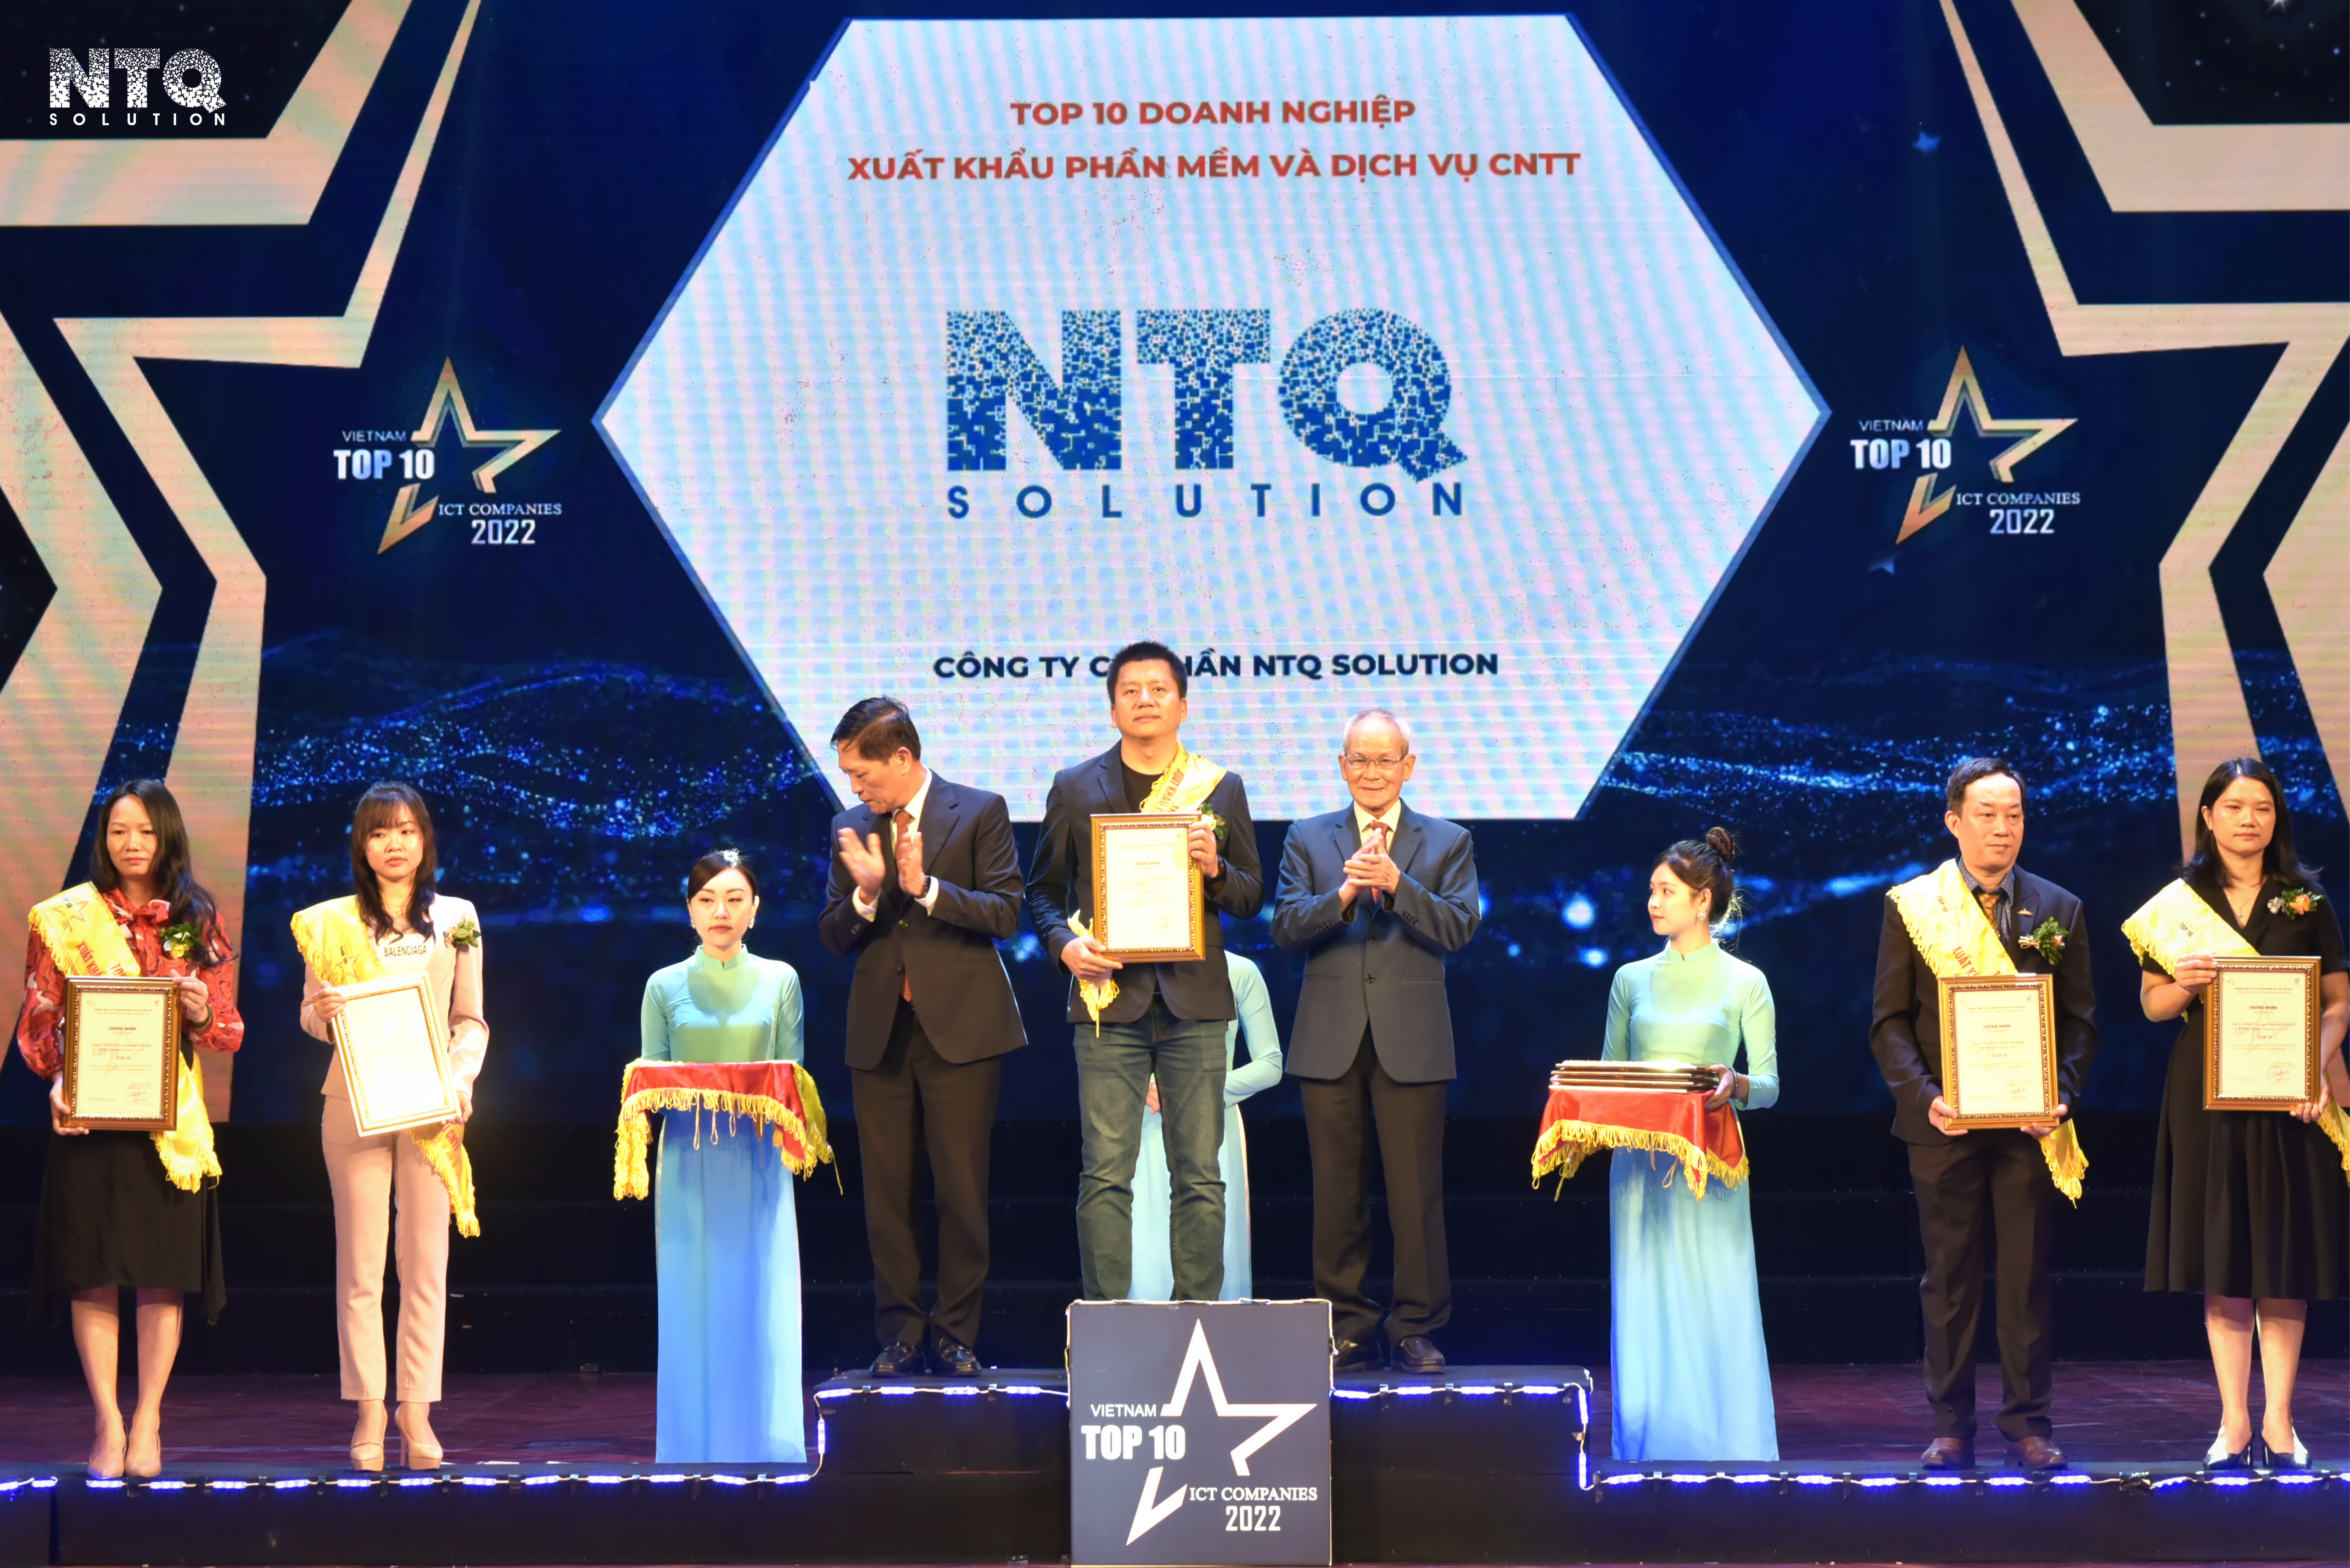 NTQ Solution Is Honored To Be In The TOP 10 Vietnam IT Companies 2022